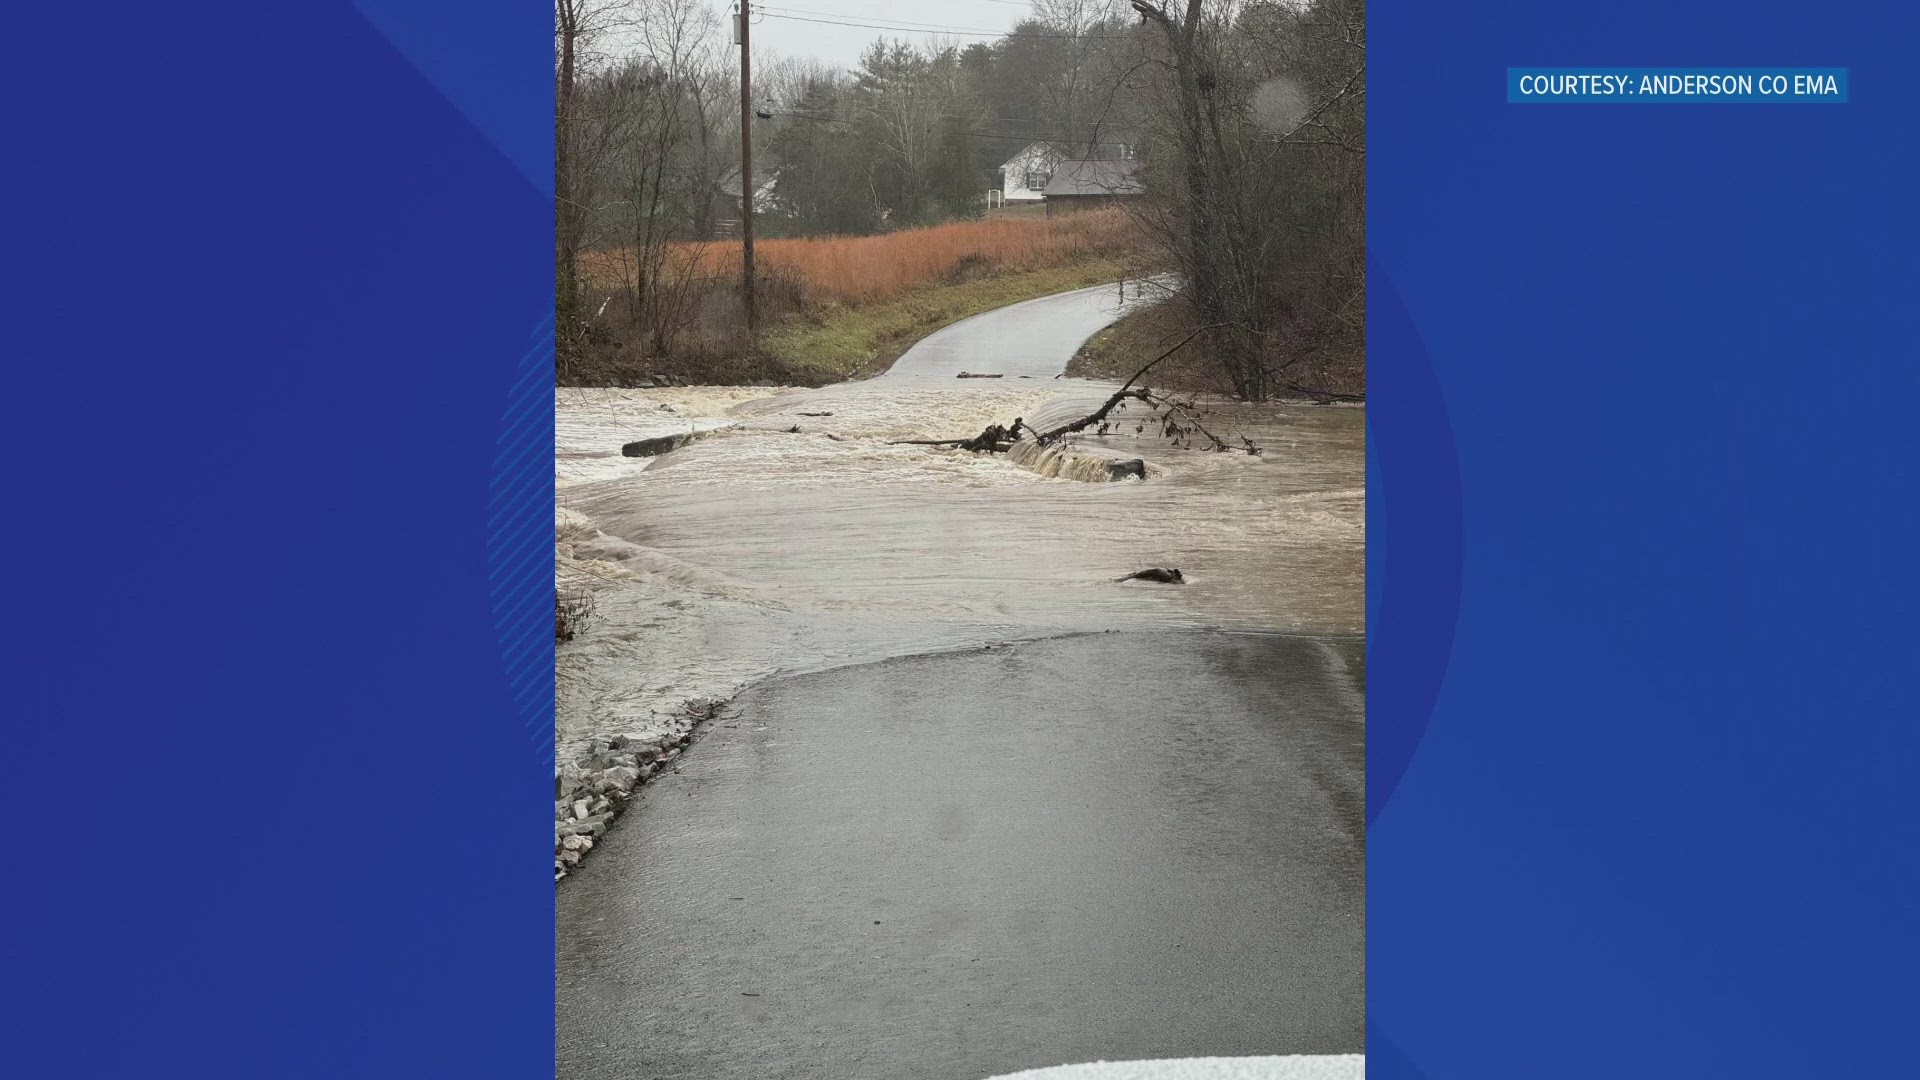 People in Sevier County shared videos of the Little Pigeon River looking not-so-little. It had swollen by several feet after Tuesday's heavy rain.